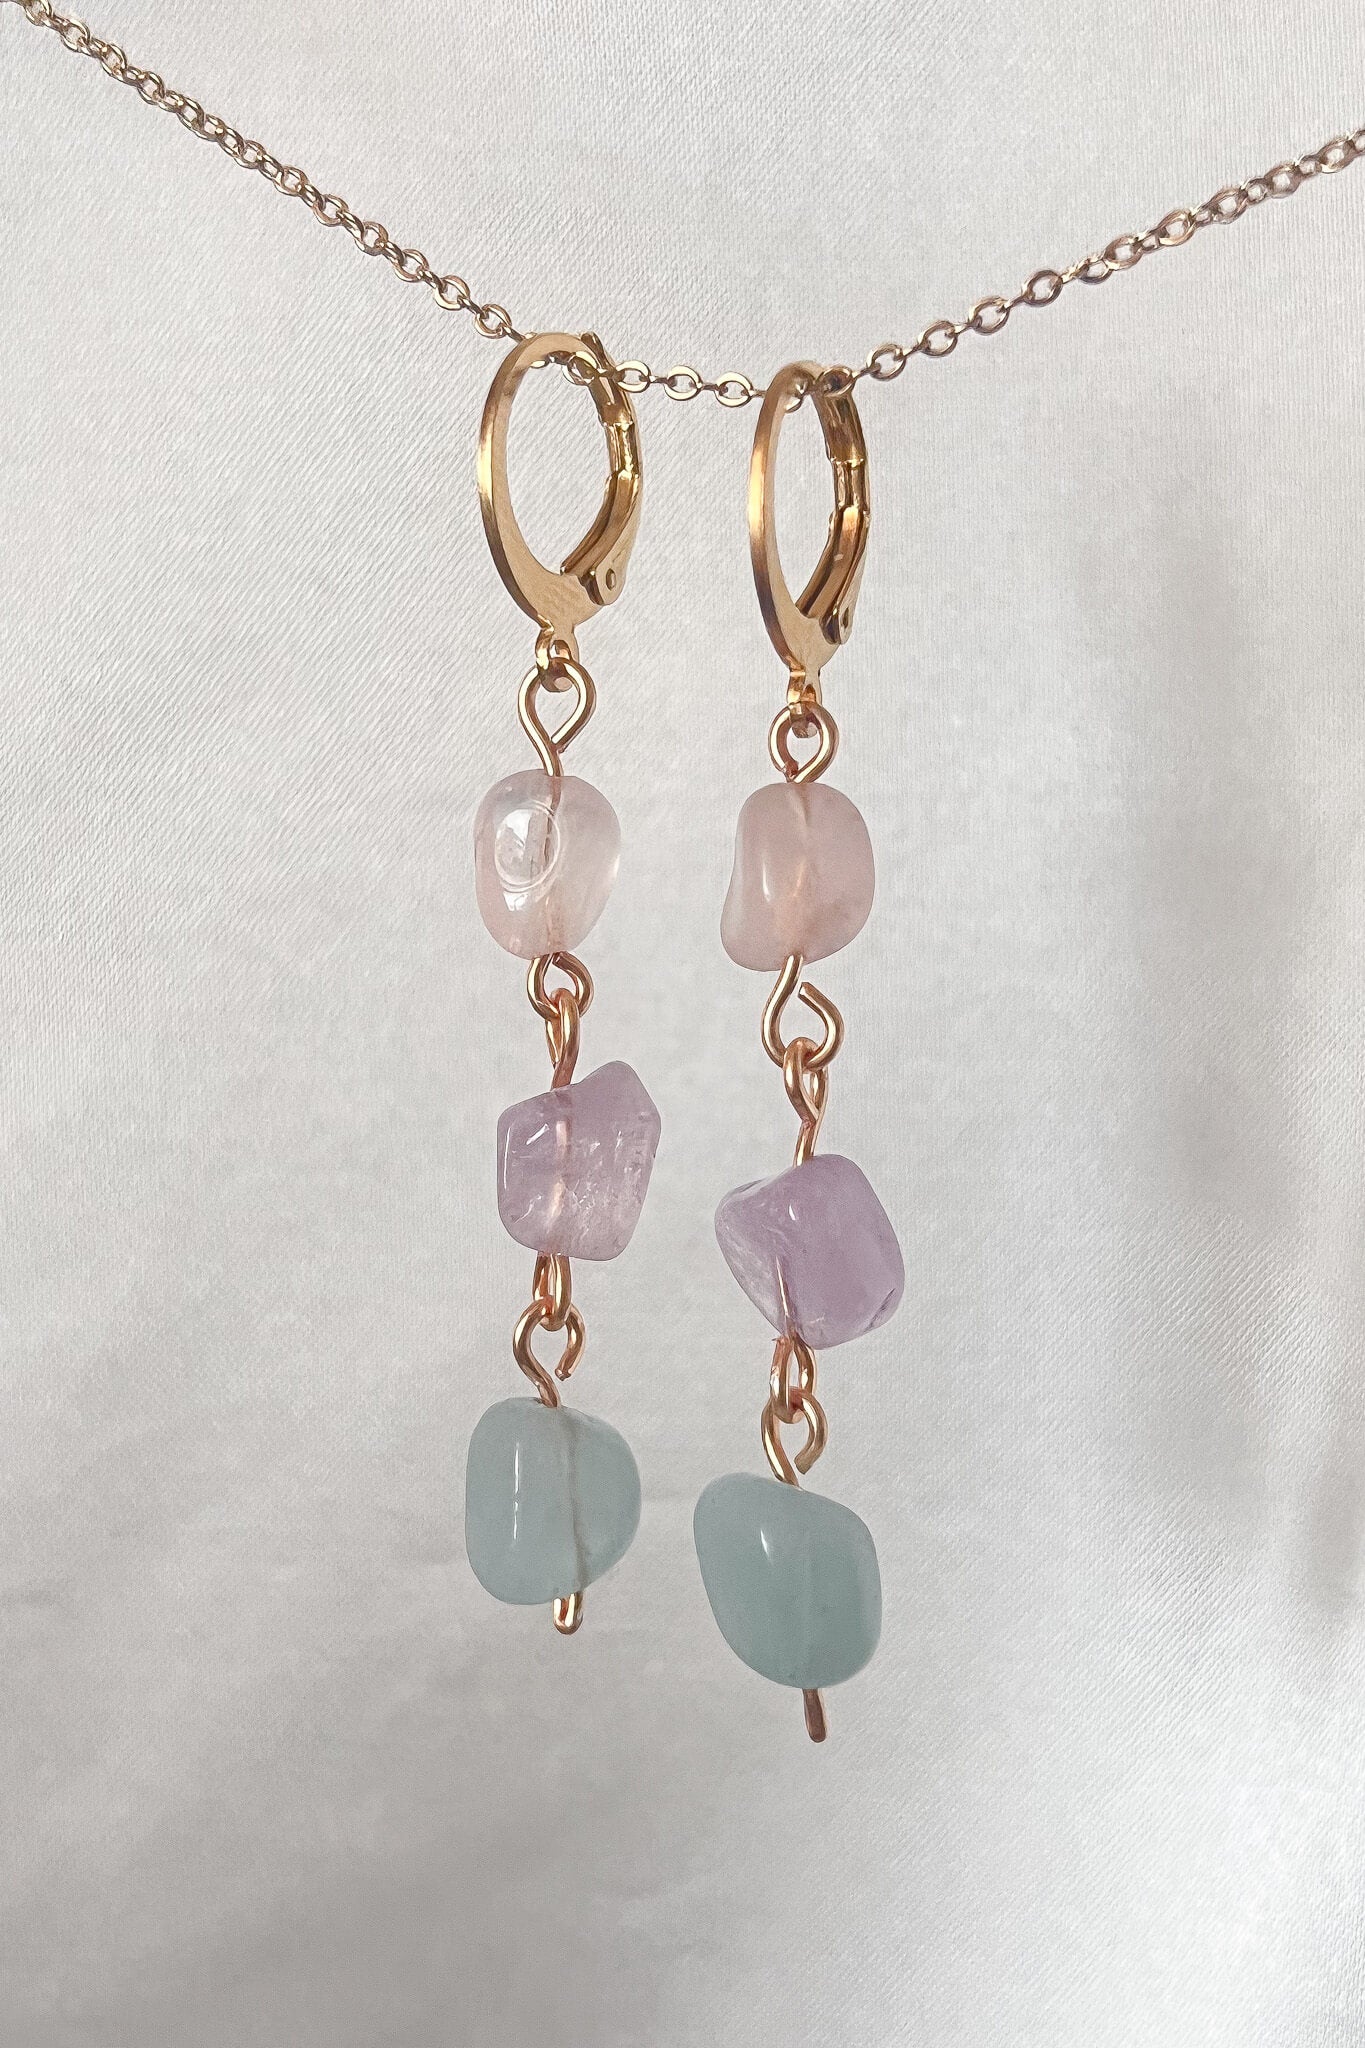 taylor swift lover era dangling crystal earrings with gold hardware, handmade